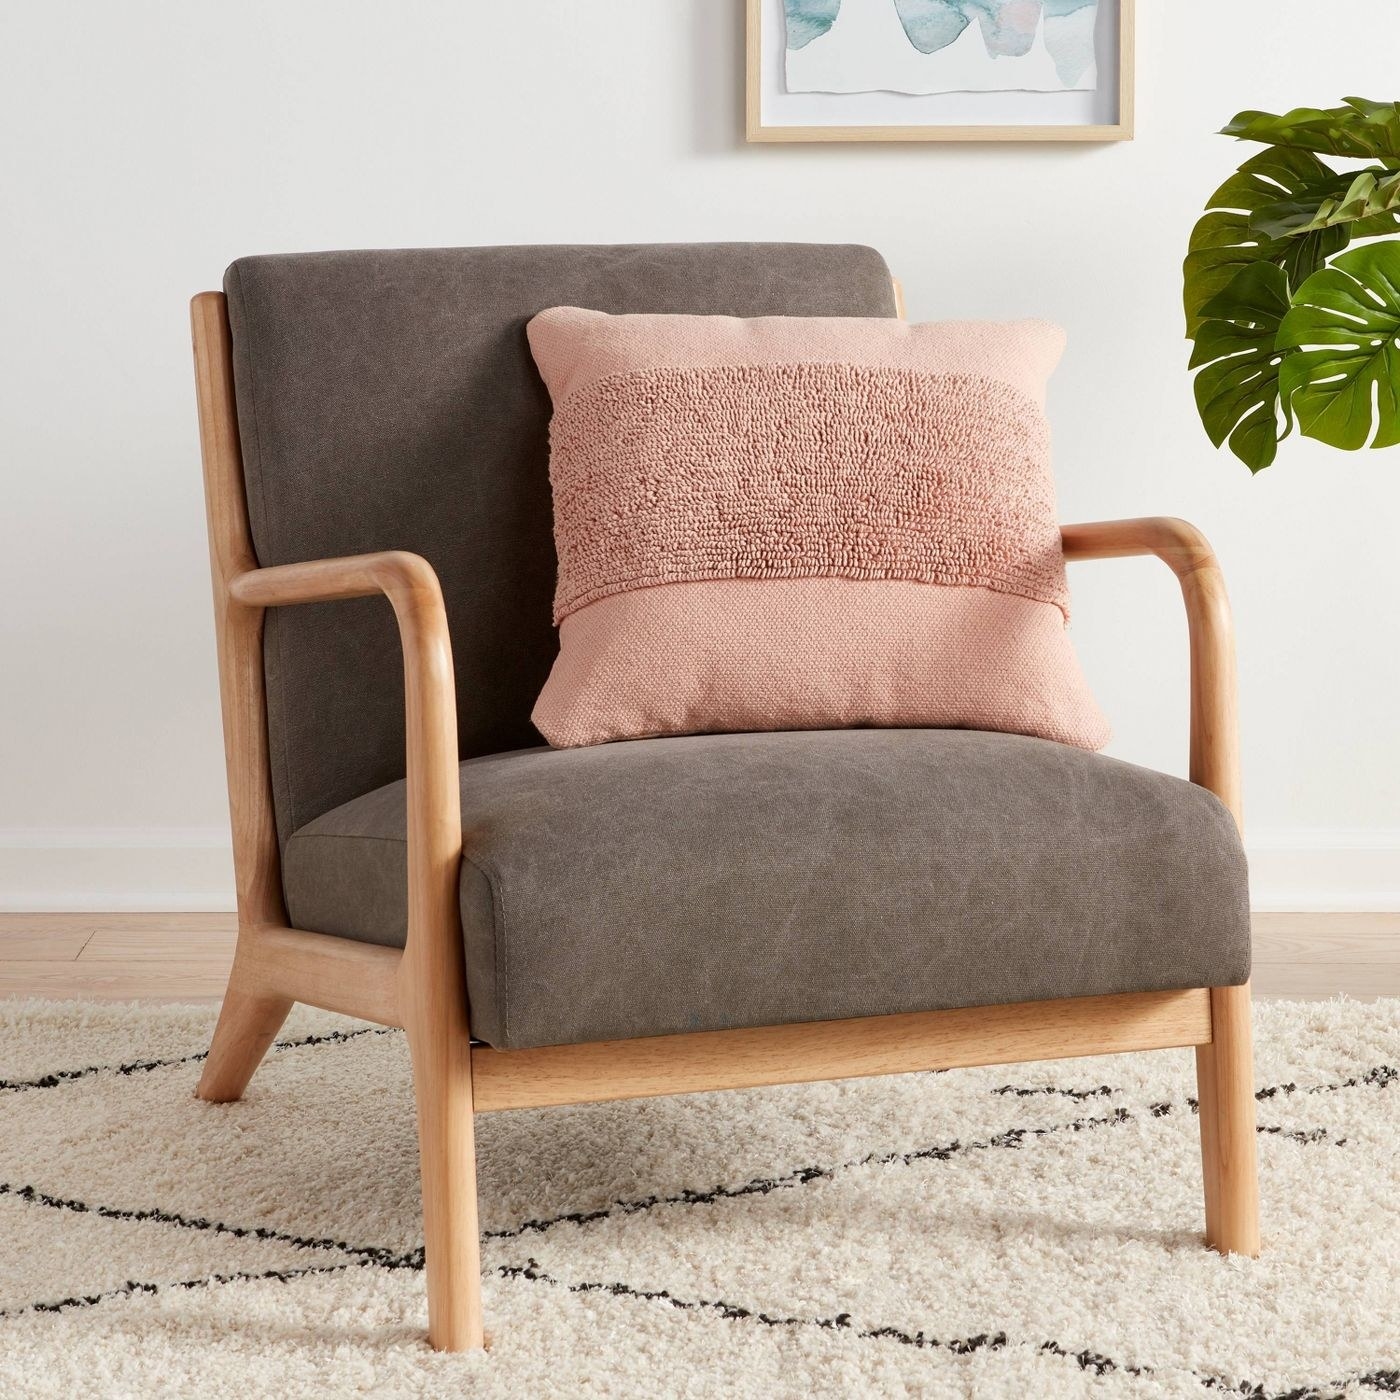 blush colored throw pillow on an arm chair